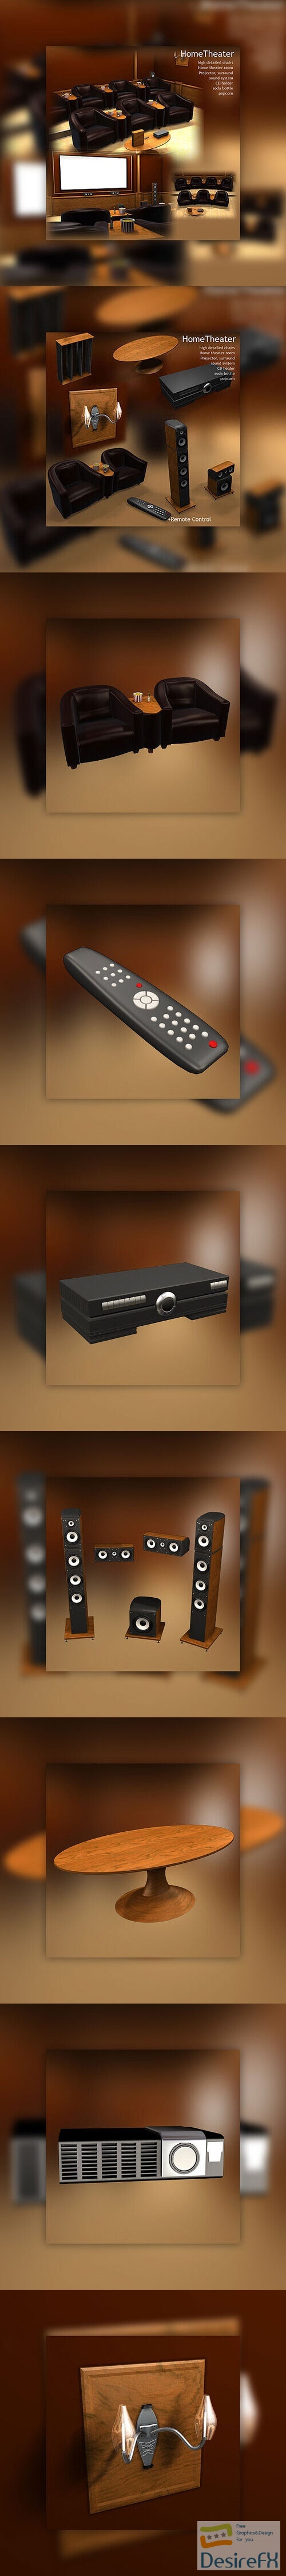 Home Theater 3D Model